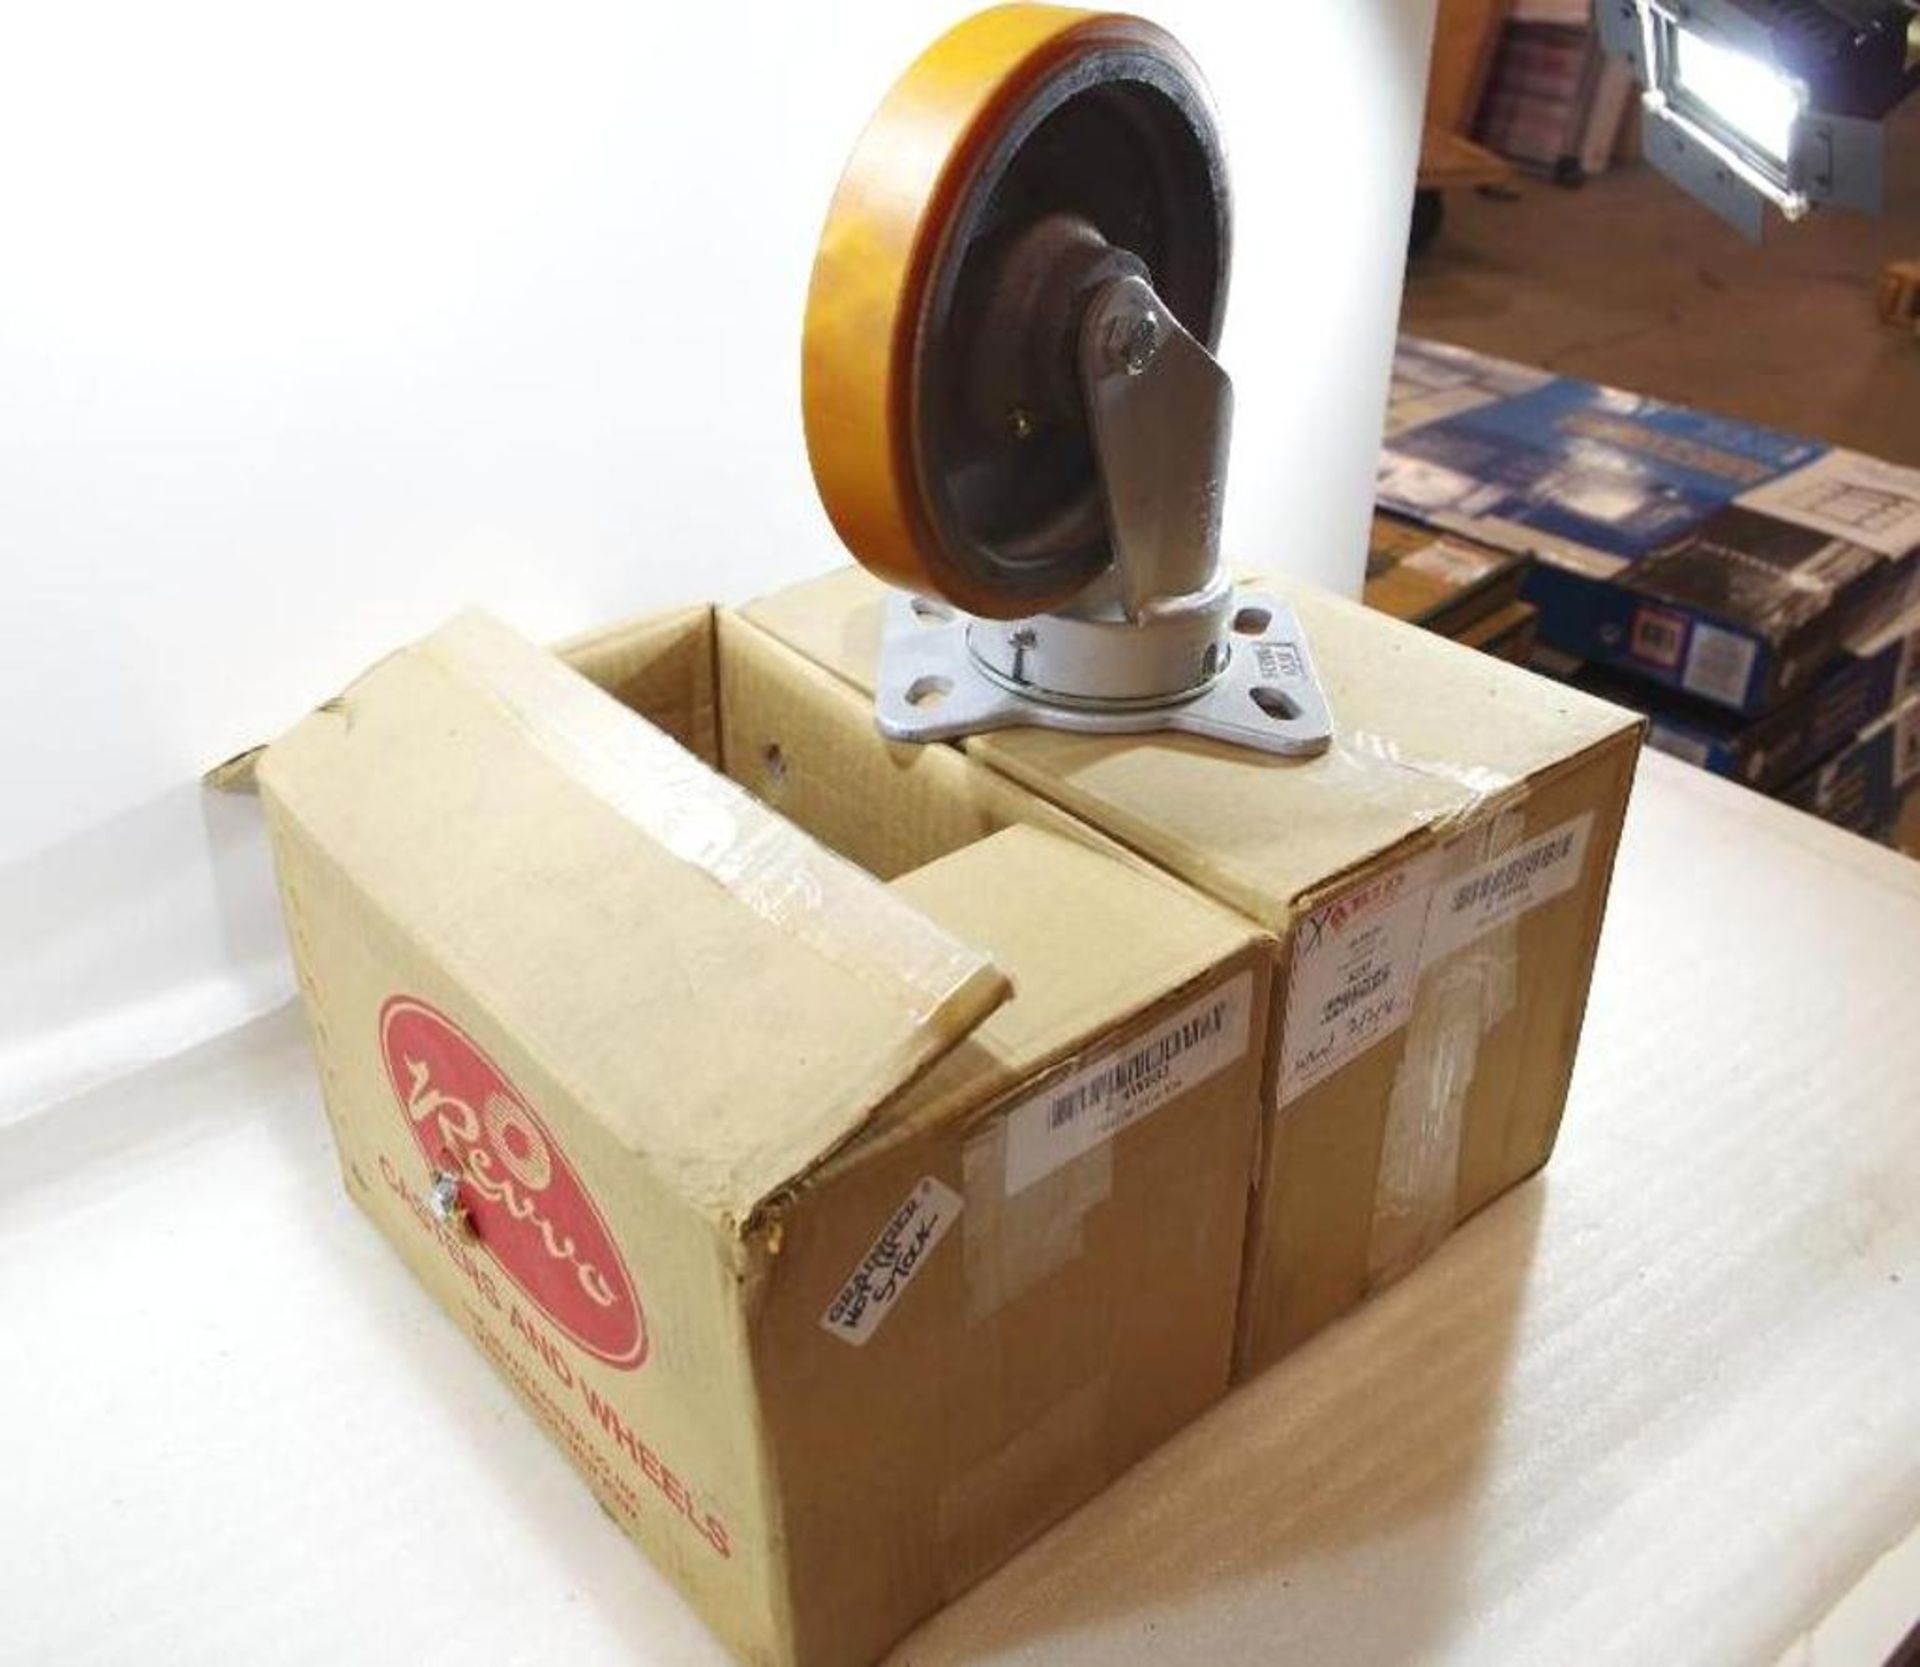 [4] 8" Medium-Duty Kingpinless Swivel Plate Caster, 2420 lb. Load Rating, (2 Boxes of 2 Each)